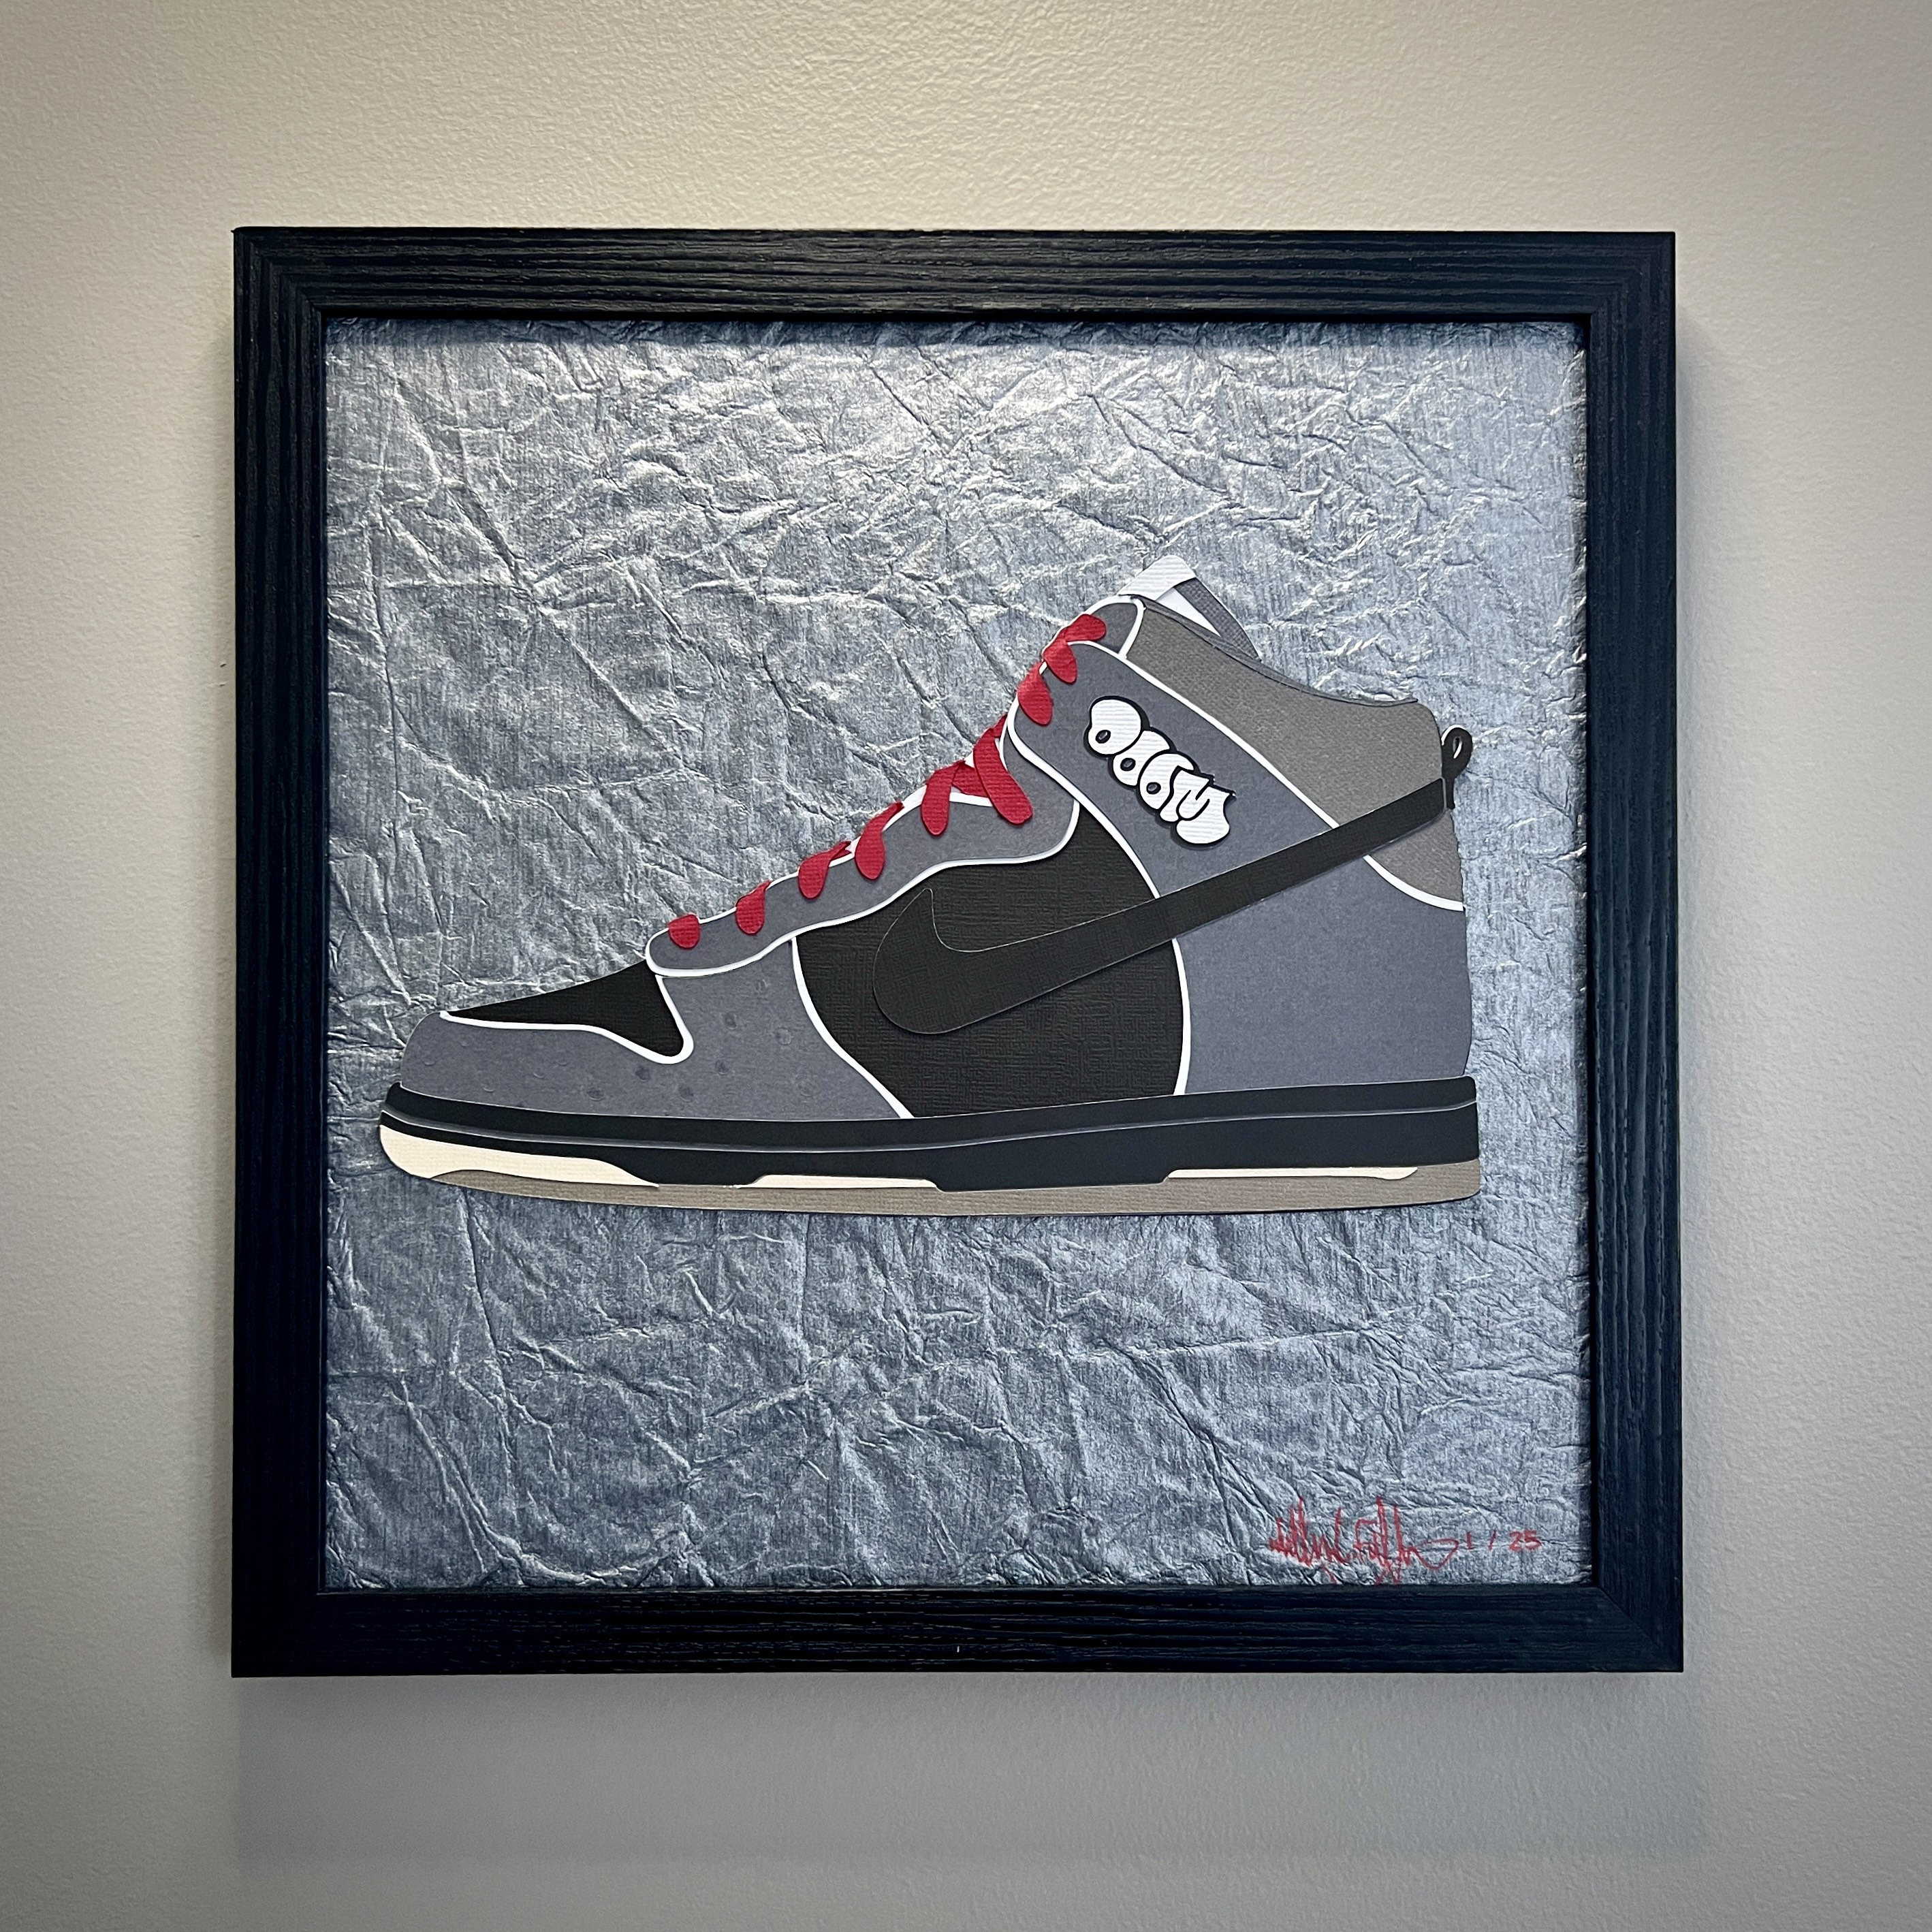 Túnica Higgins Cambiable MF DOOM Nike SB Dunk High Pro Layered Paper Wall Art in a Wood - Etsy